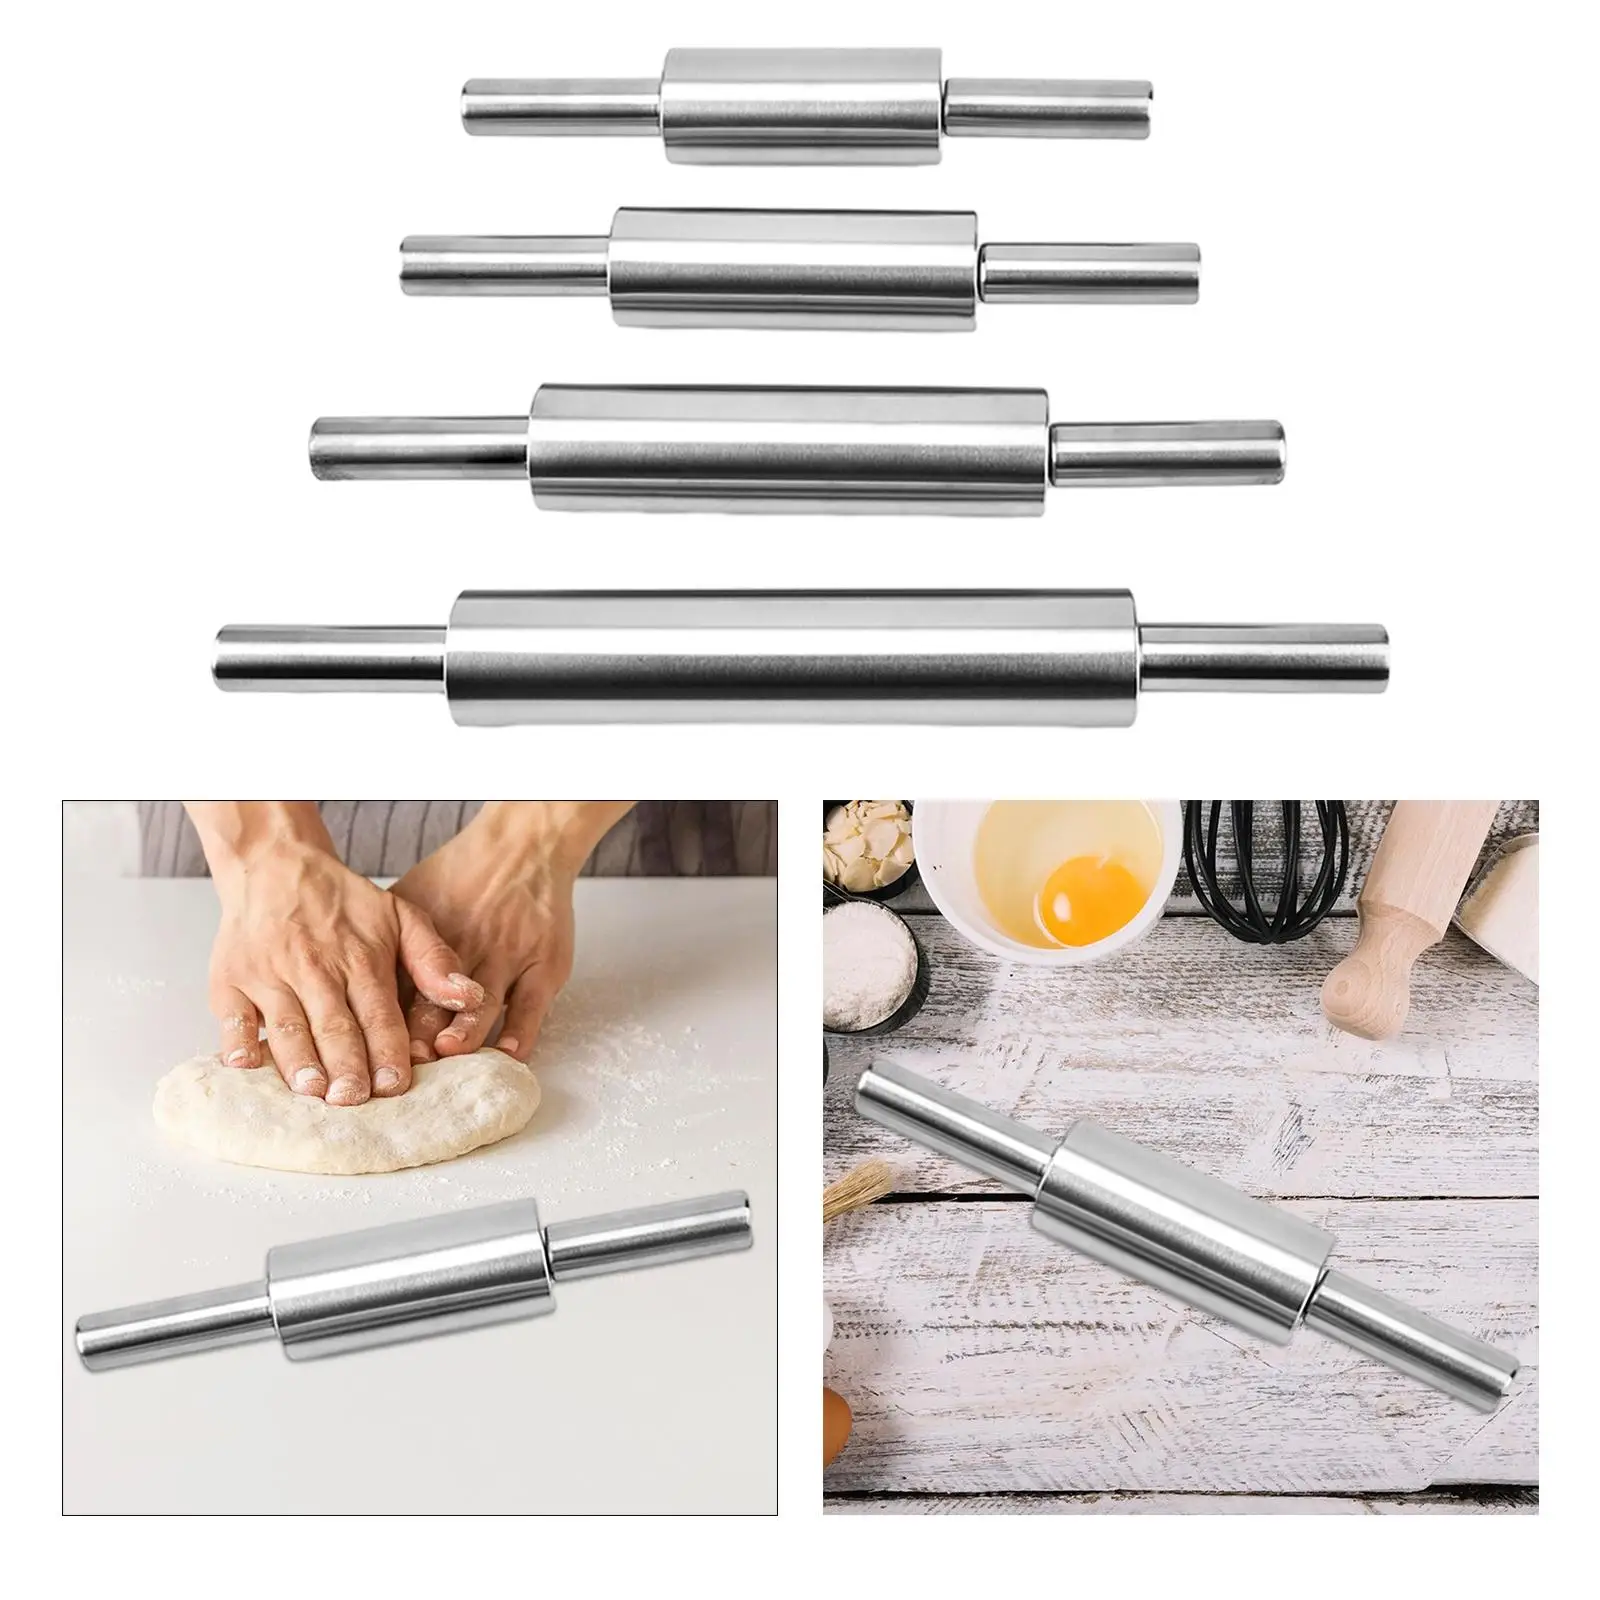 Stainless Steel Rolling Pin Easy Cleaning Handheld Pie Making Baking Tool for Cookies Biscuit Pizza Pie Pastries Dumpling Making